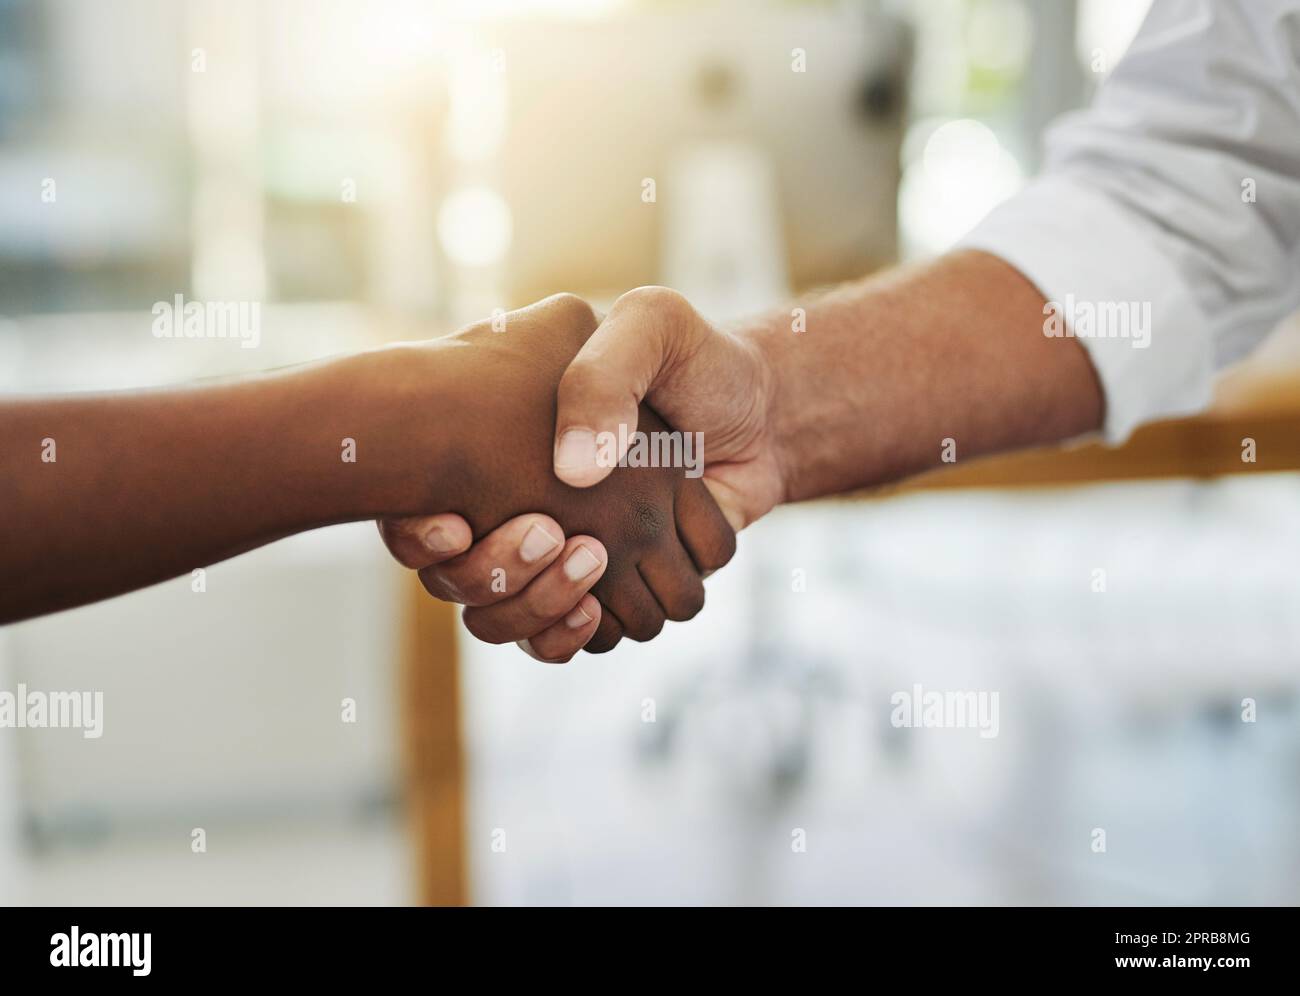 A team handshake in agreement between colleagues and coworkers in an office. Working together as a team to achieve success, merge as a partnership or promote a business person at work closeup Stock Photo